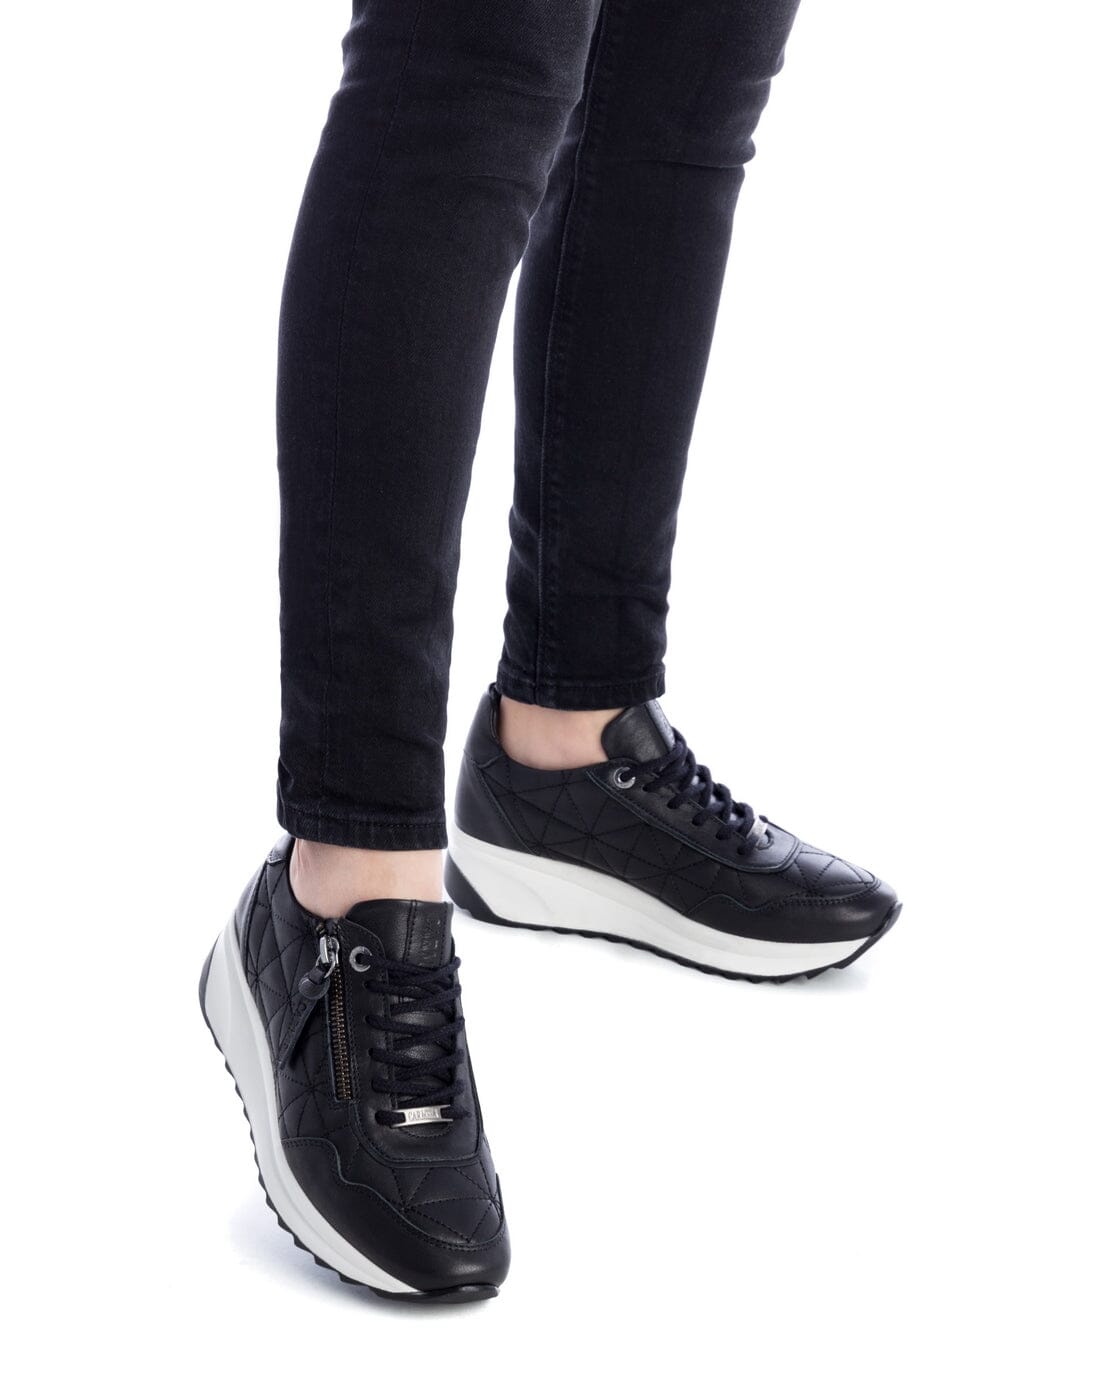 160209 Spanish Leather sneakers with quilted detail & cushion sole in Black sneakers Sam Star shoes Black 37 